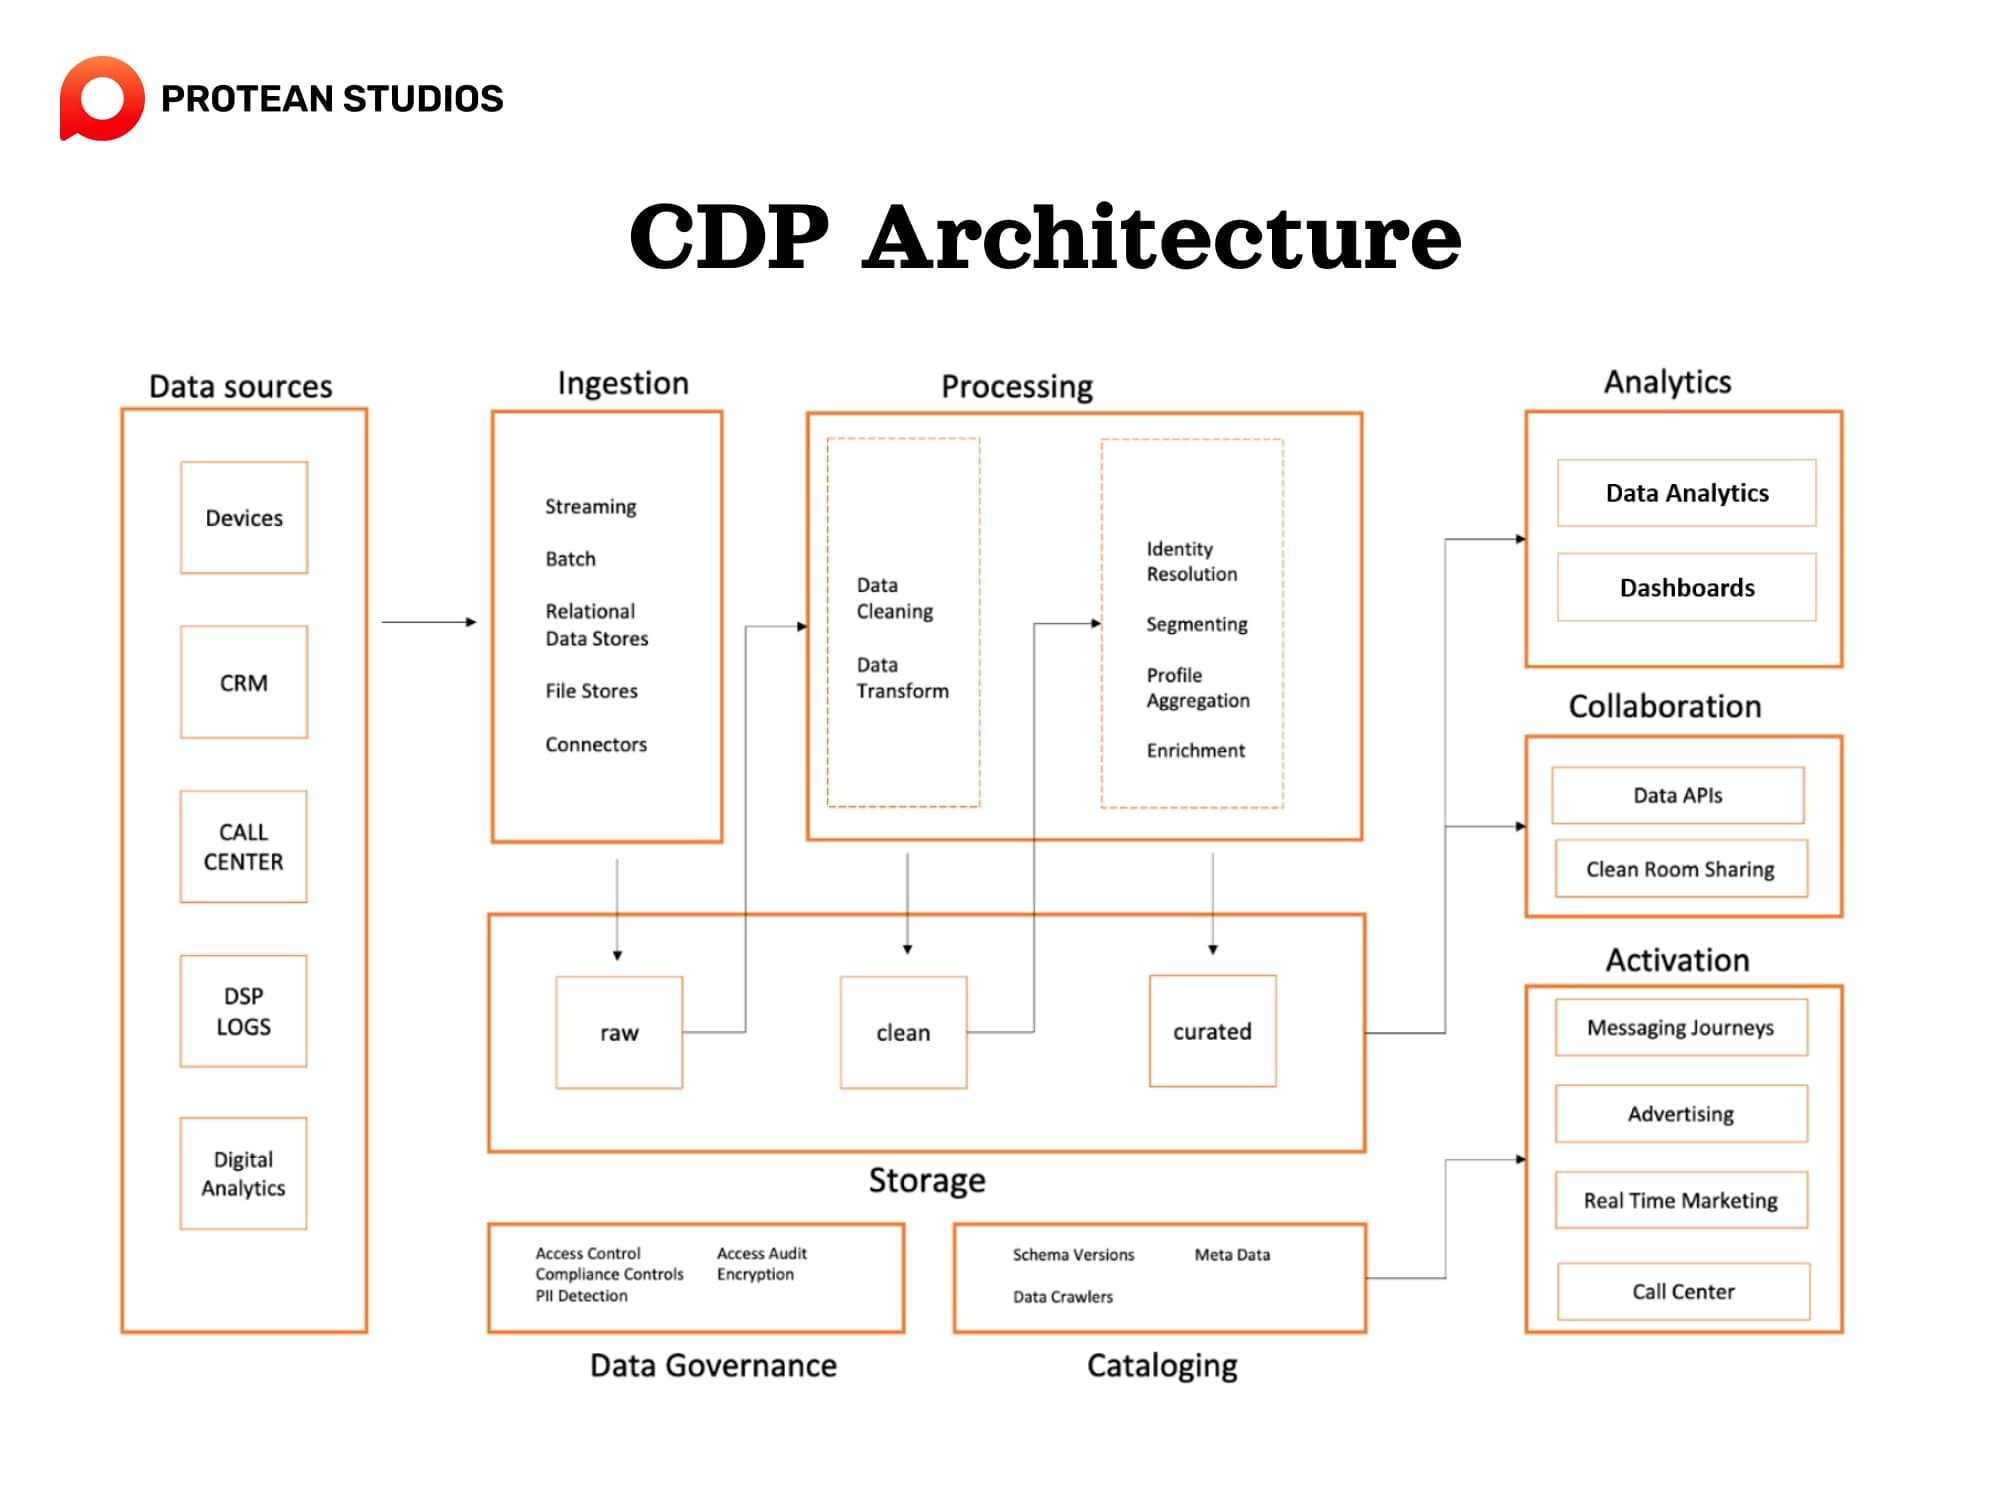 The whole system of a CDP architecture